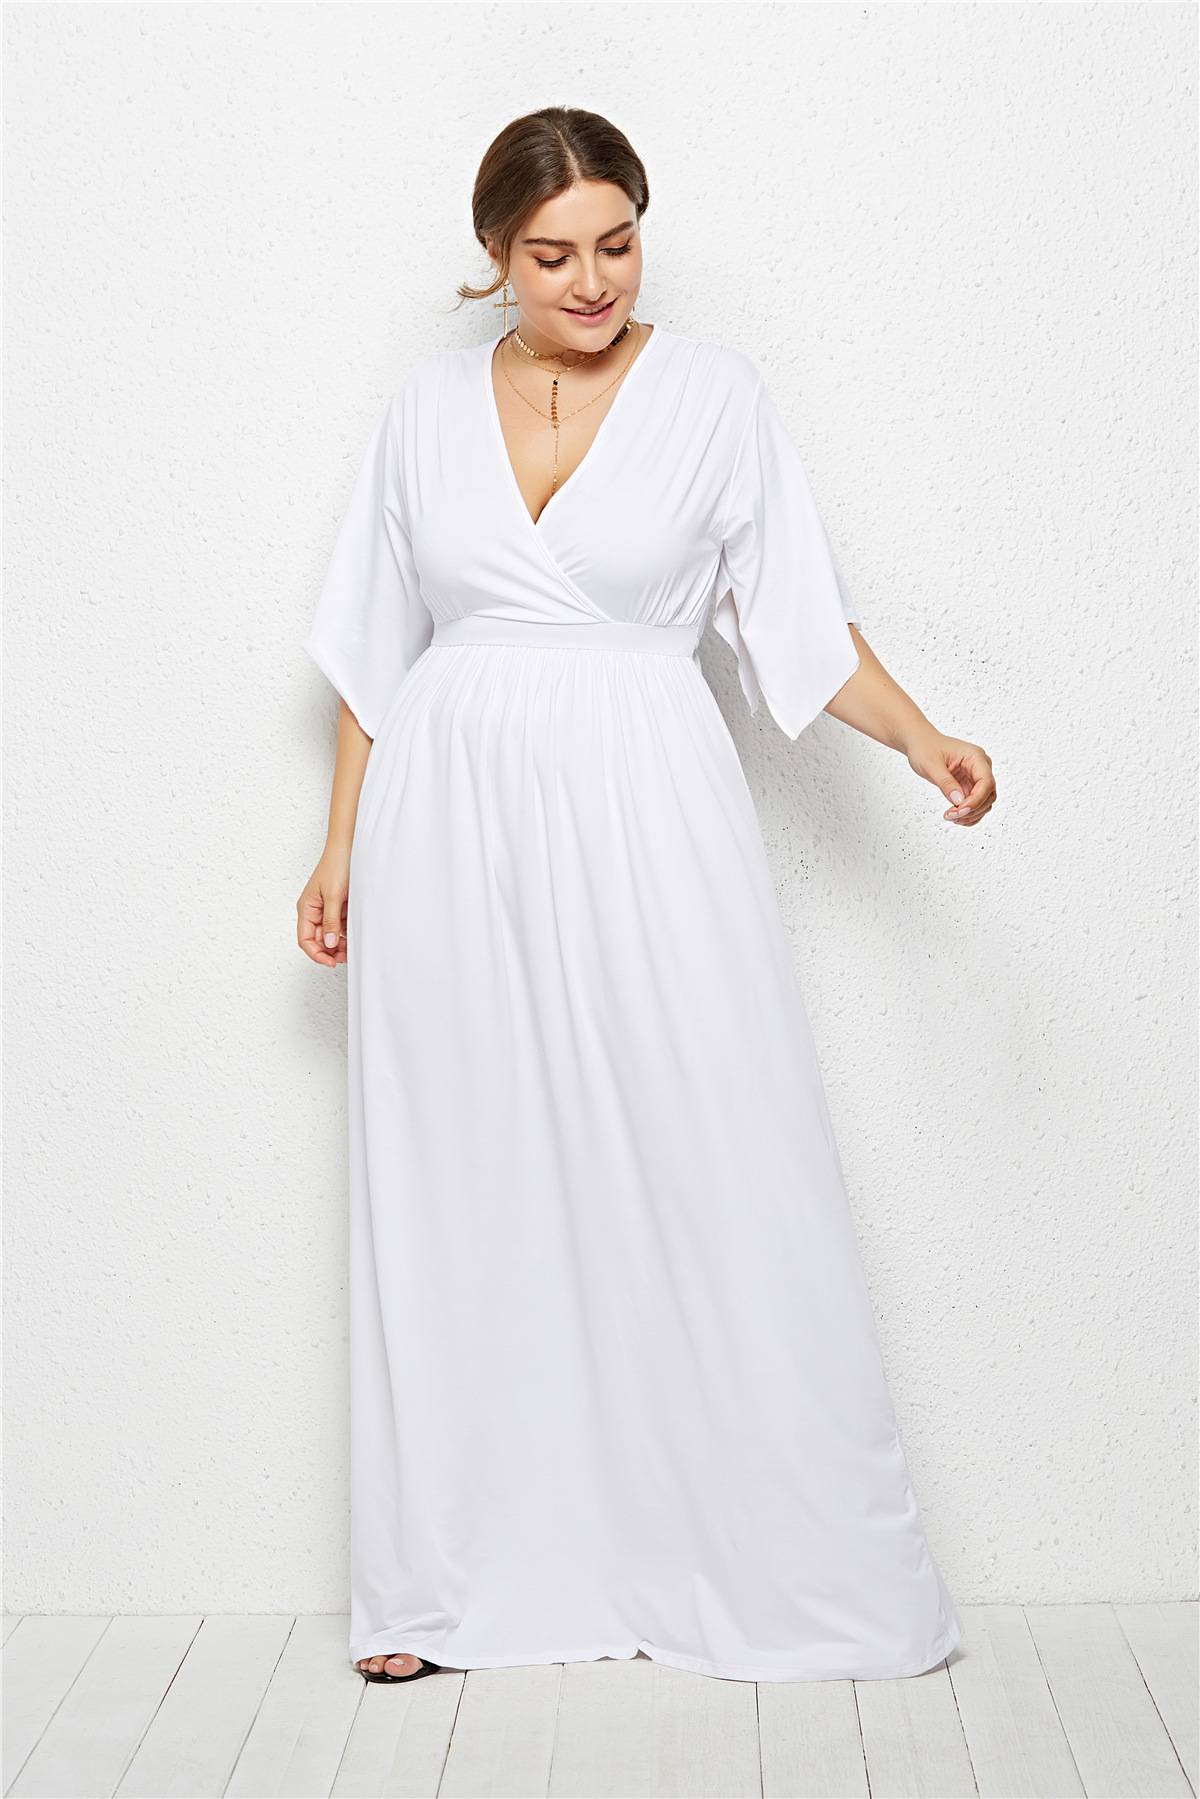 DR870003 Oversized ladies V-neck high-waist tie-up party dress